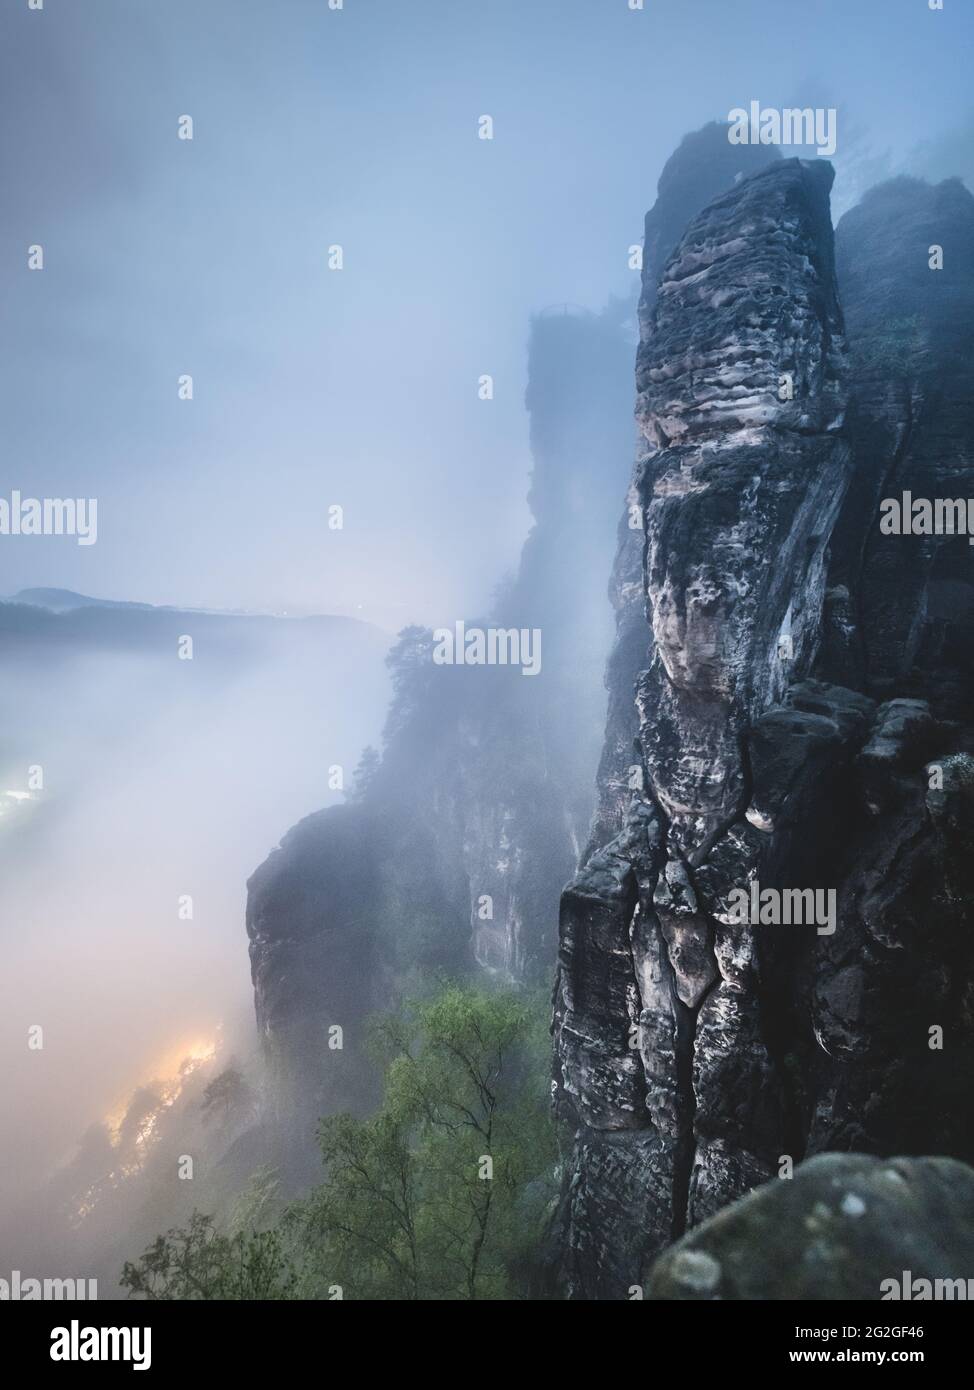 Nocturnal view from the Bastei bridge in the misty Elbe Sandstone Mountains. Stock Photo